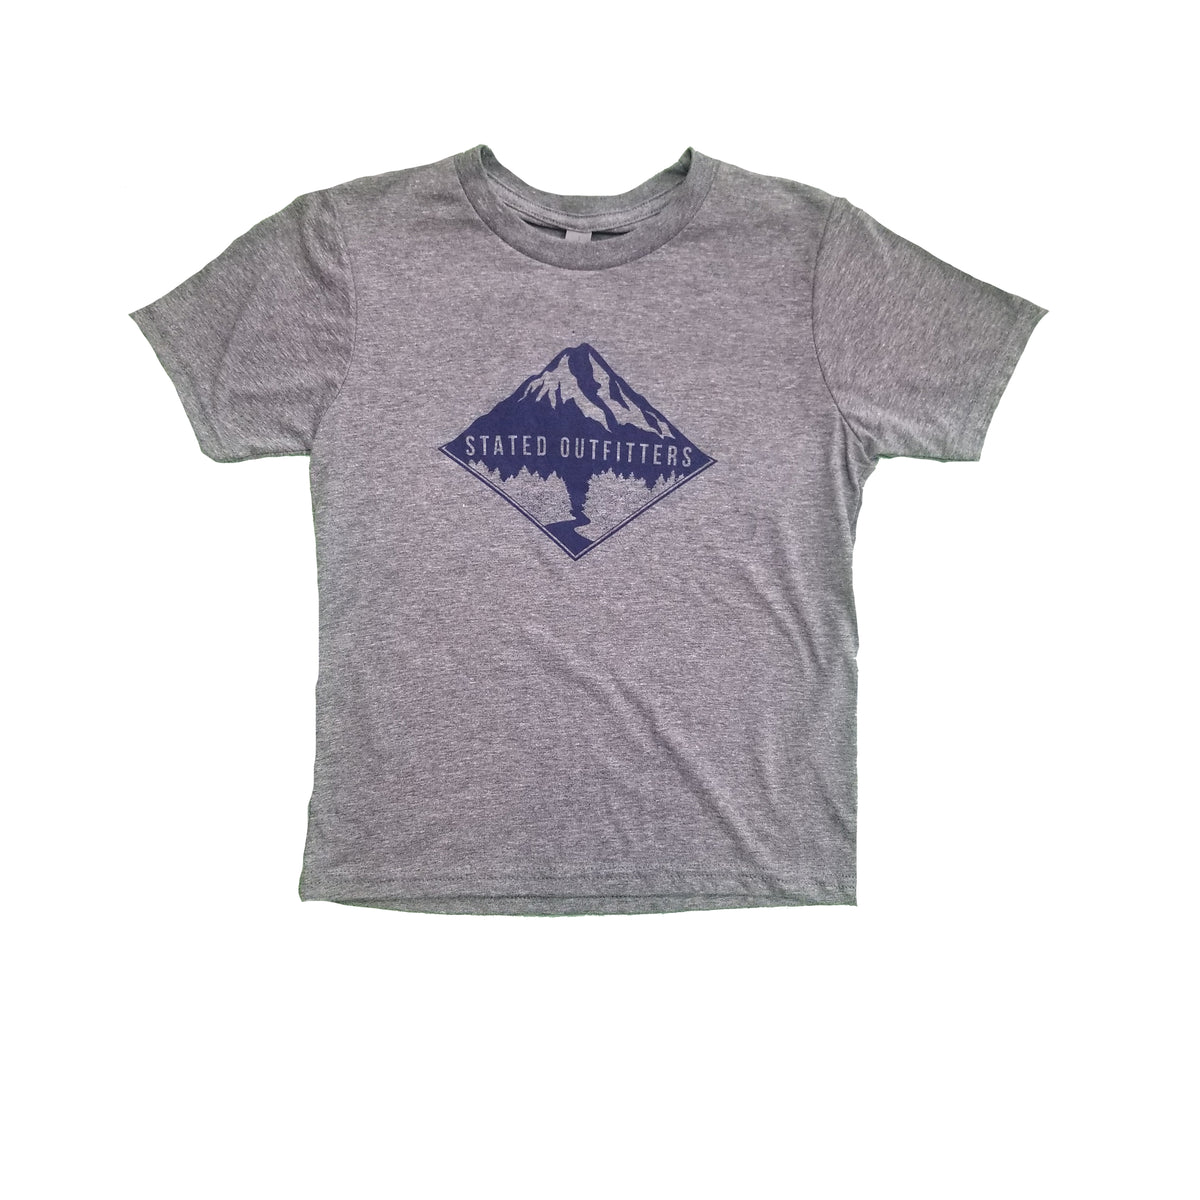 Stated Outfitters Youth Grey/ Navy Mountain Tee